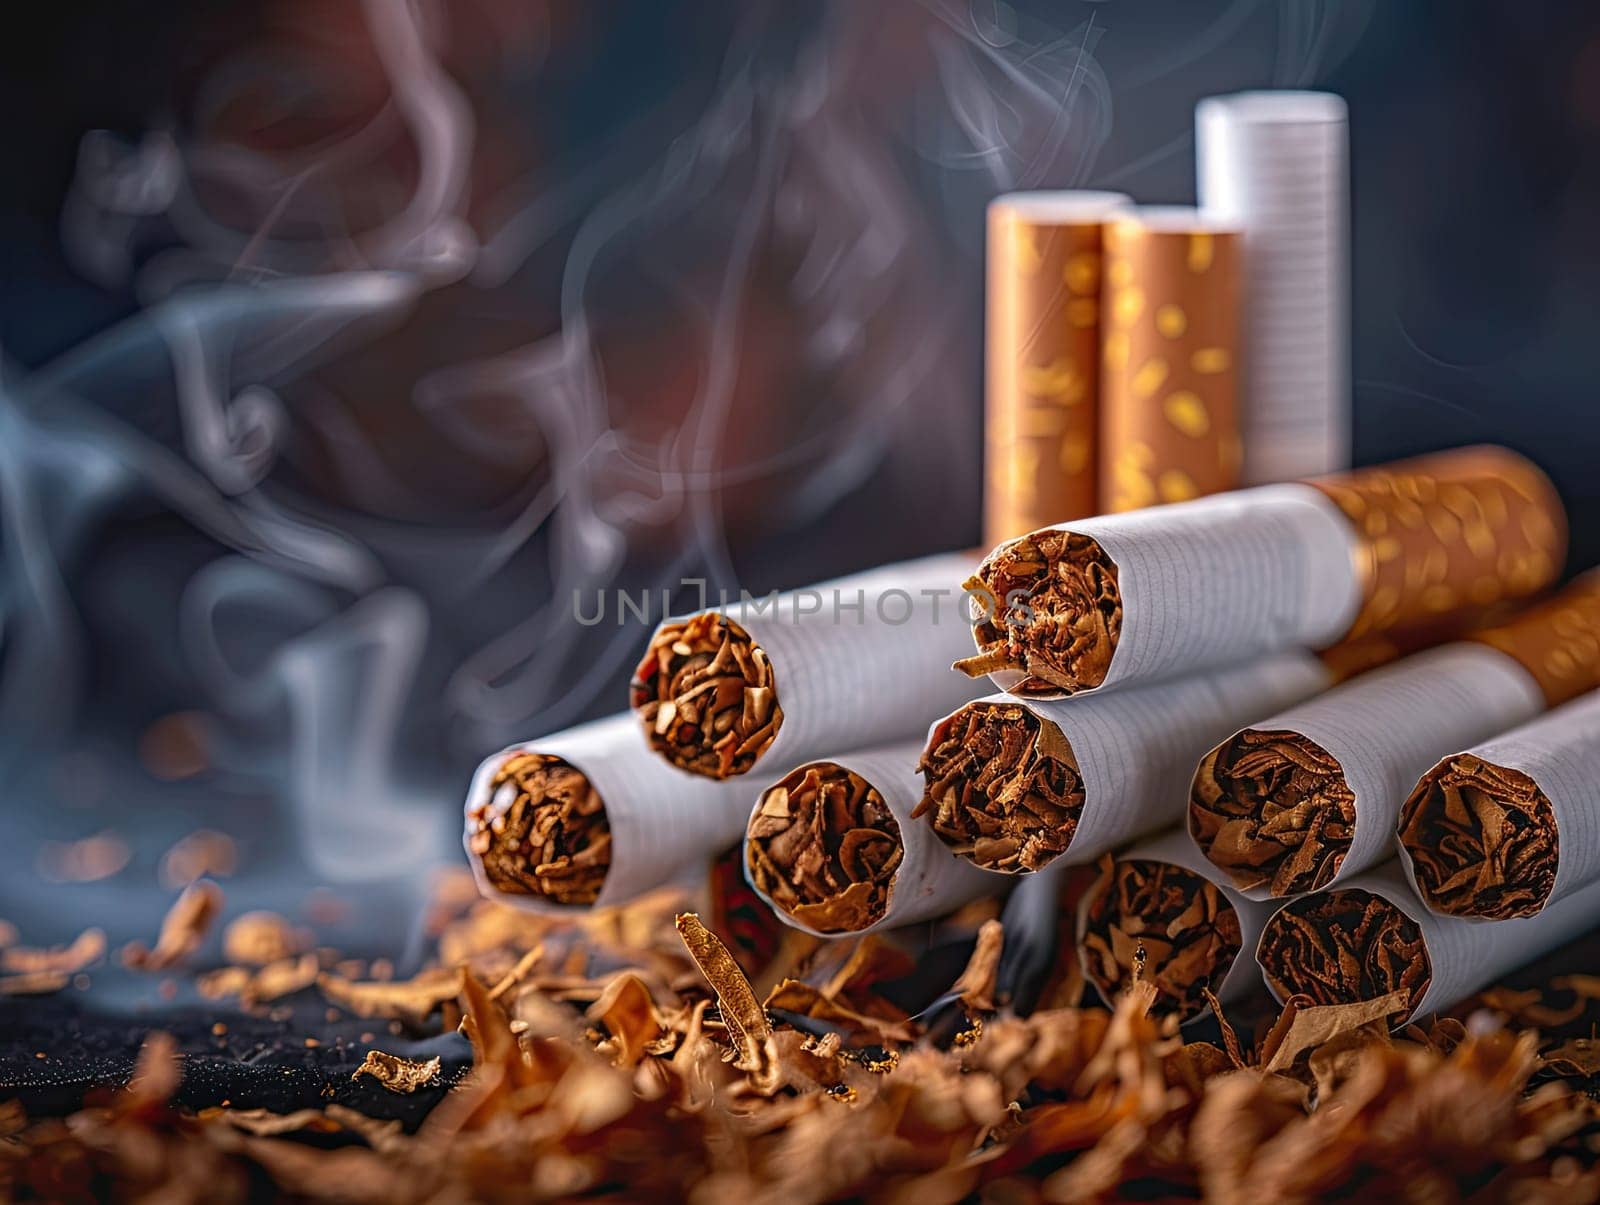 Close up of multiple unlit cigarettes with visible tobacco on dark backdrop in wisps of smoke rising. Theme of nicotine addiction and health issues related to smoking concept. Ai. by Lunnica